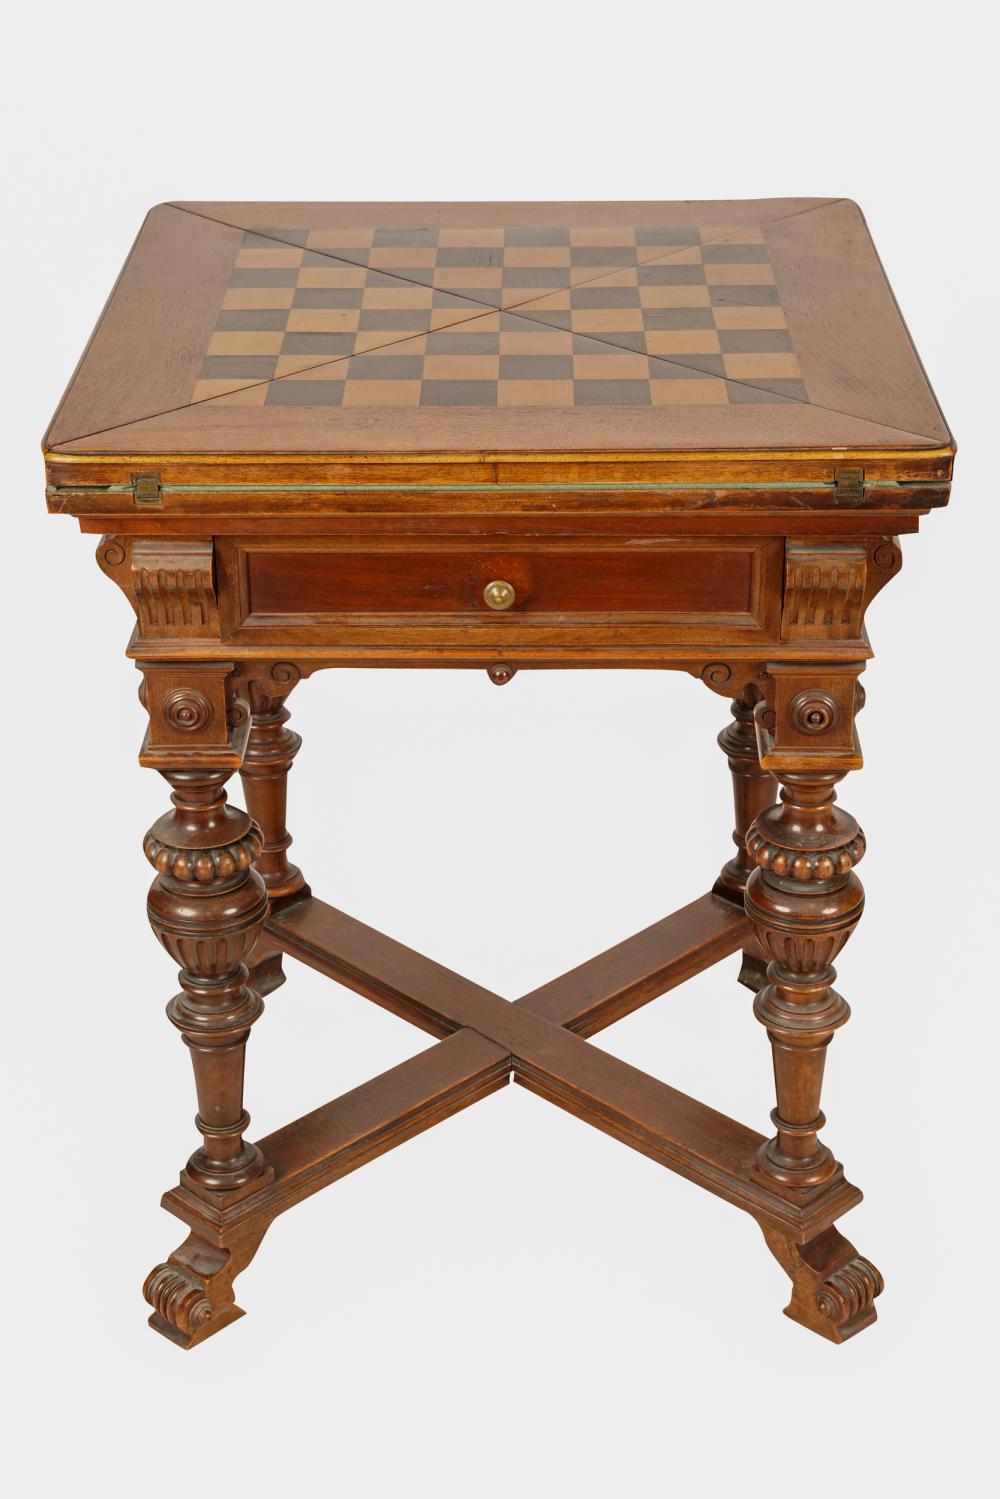 RENAISSANCE STYLE GAMES TABLEwith